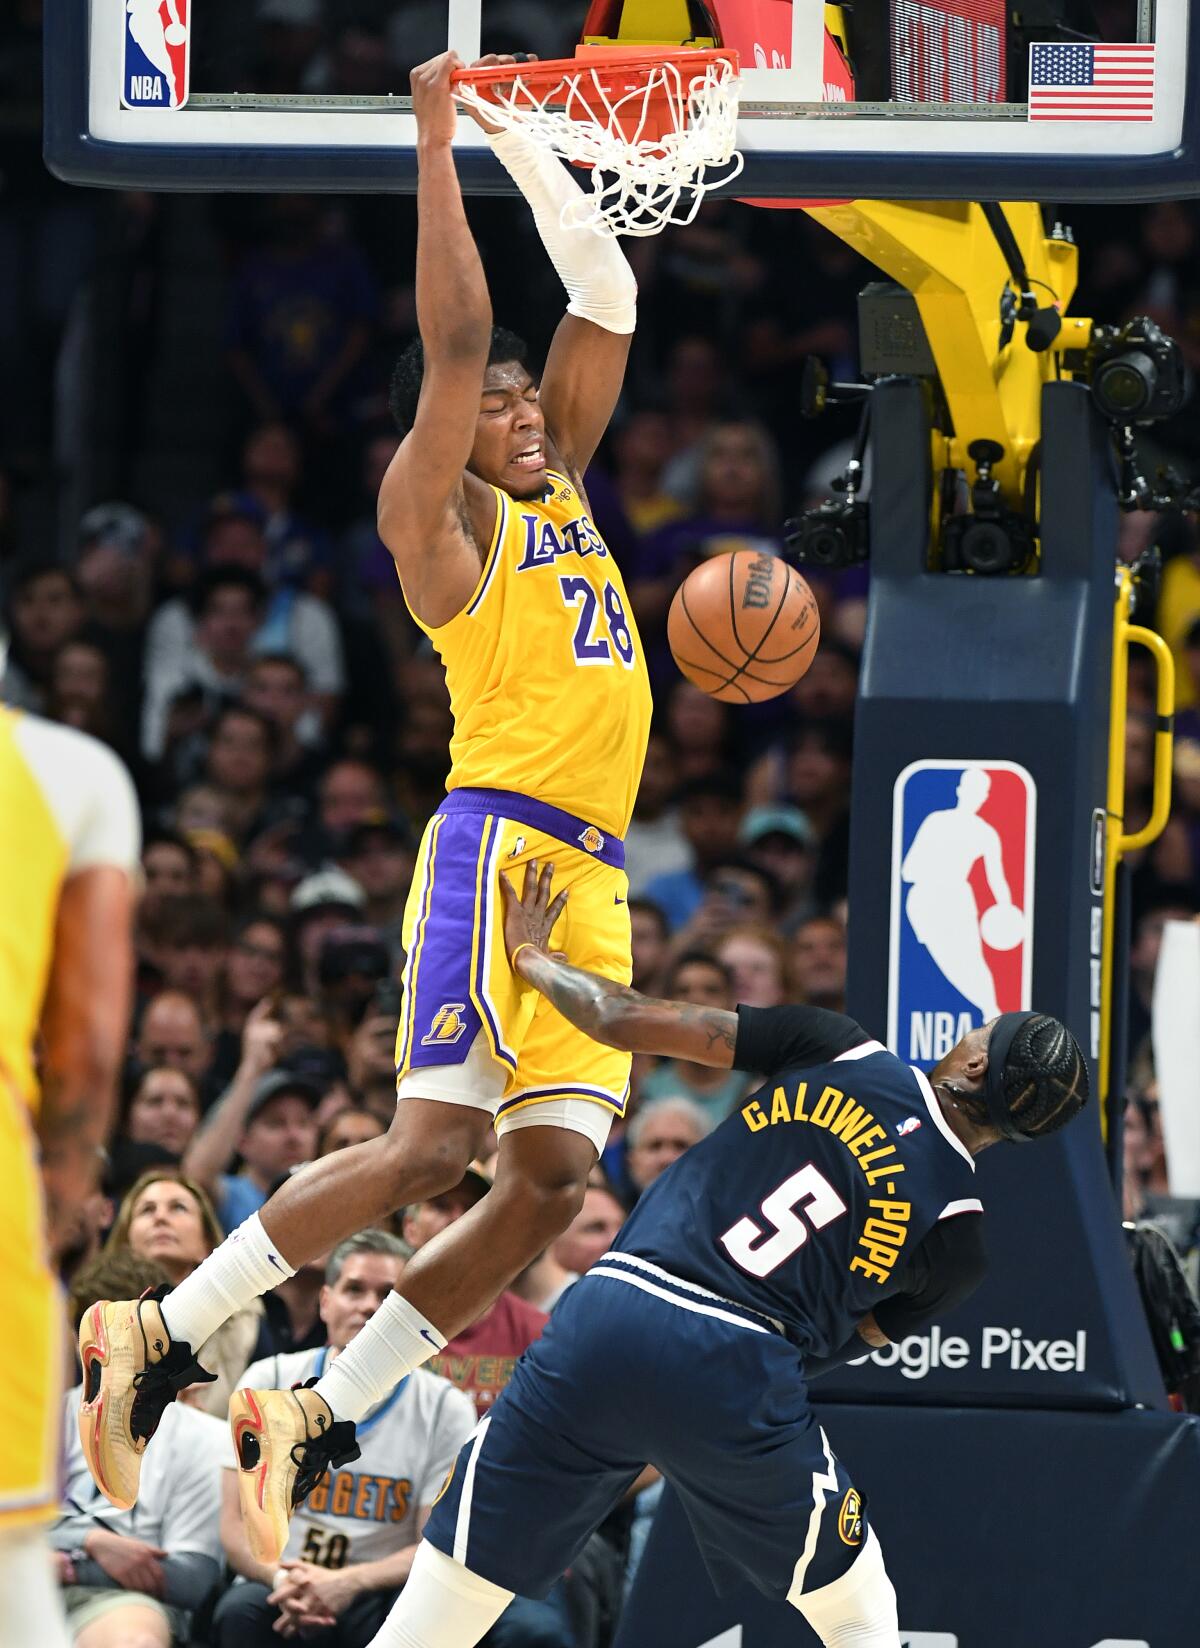 Lakers' Rui Hachimura dunks over Nuggets' Kentavious Caldwell-Pope during a basketball game.